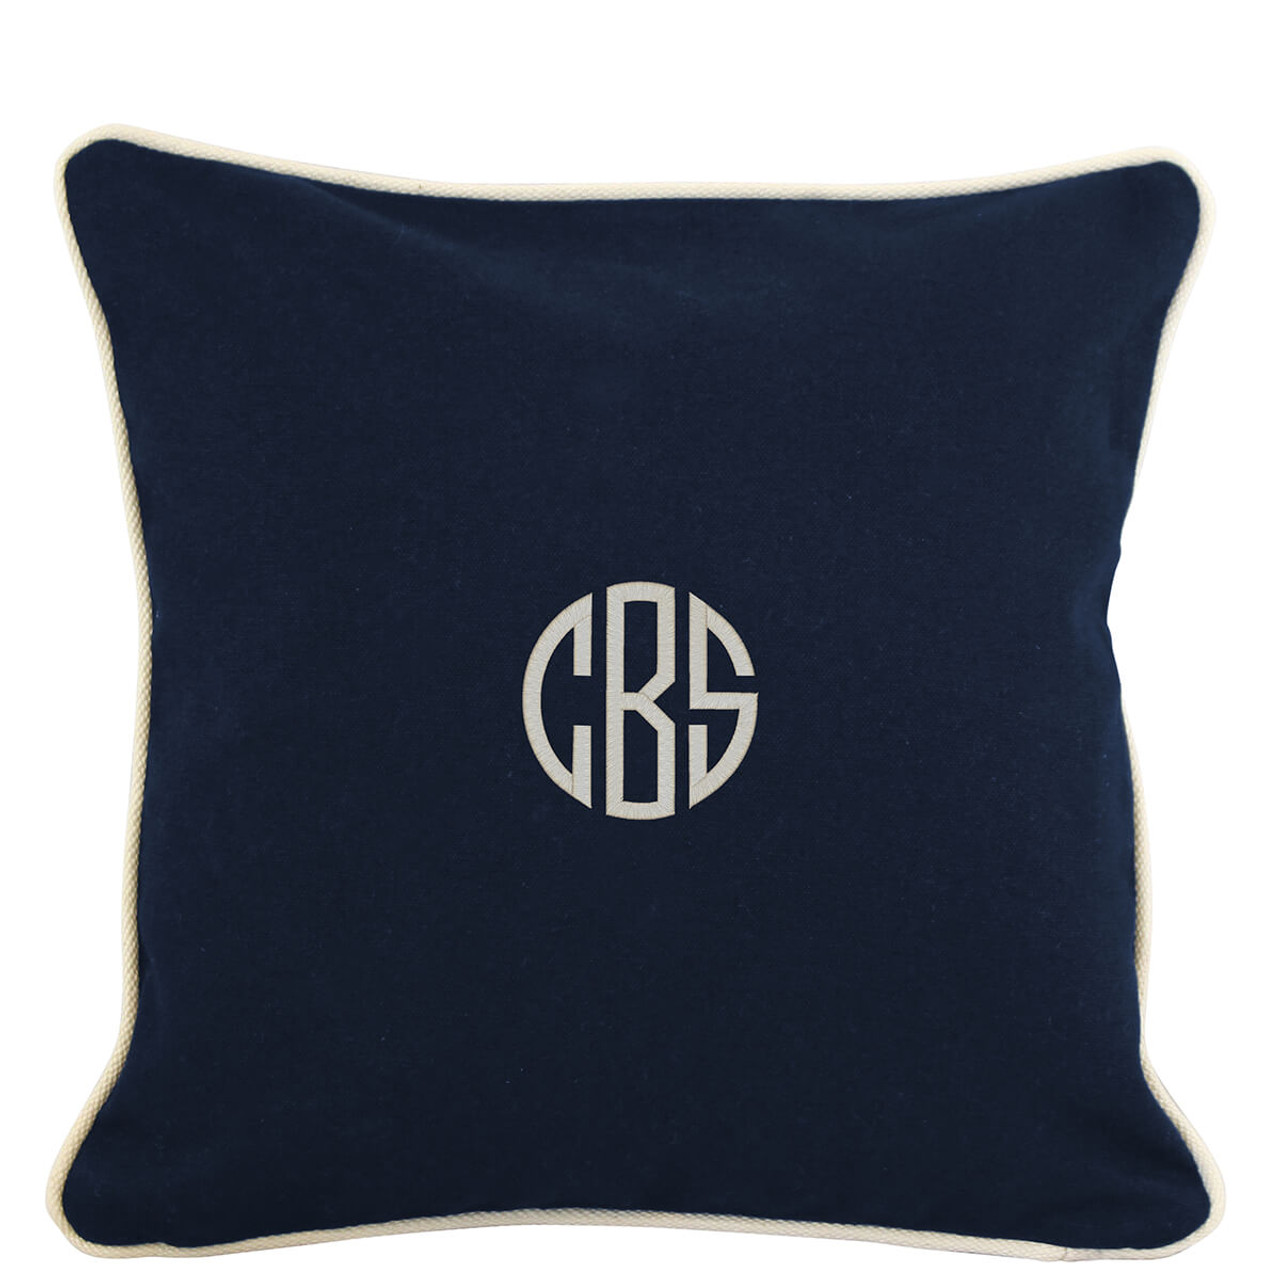 Monogrammed Navy 16 x 16 Pillow Cover ONLY - Lavington Designs LLC